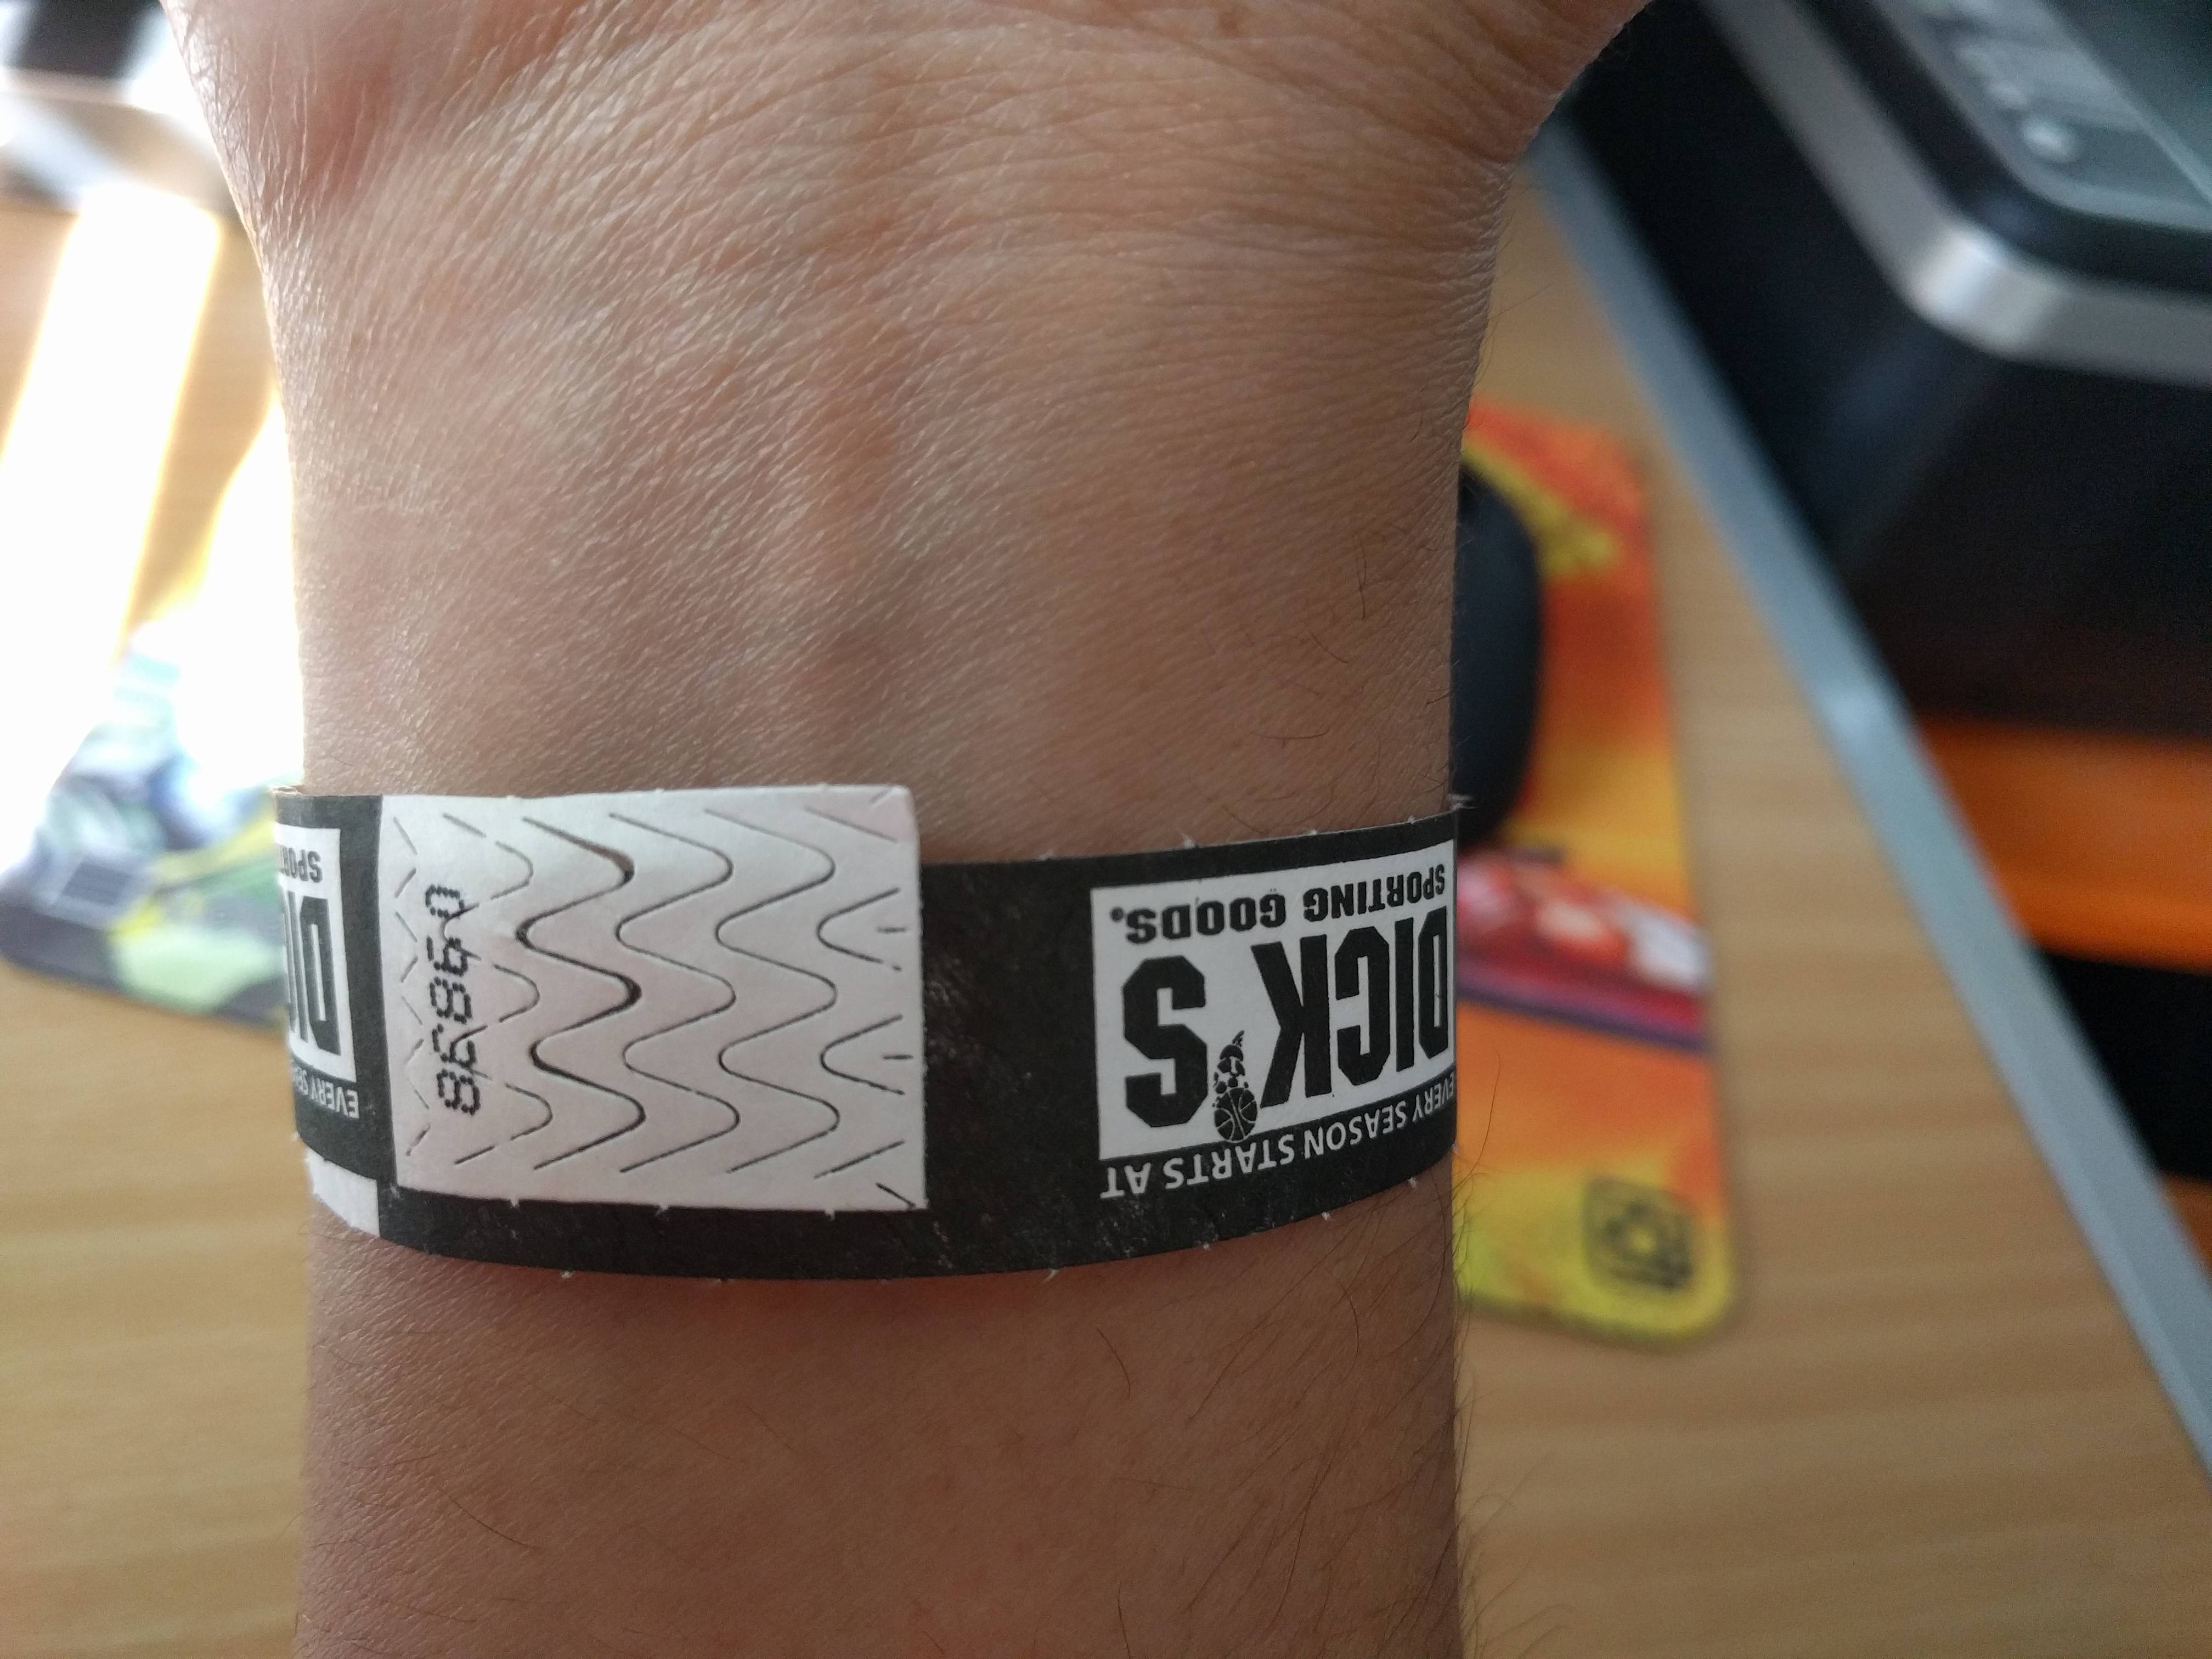 Wrist band that is not meant to be taken off.